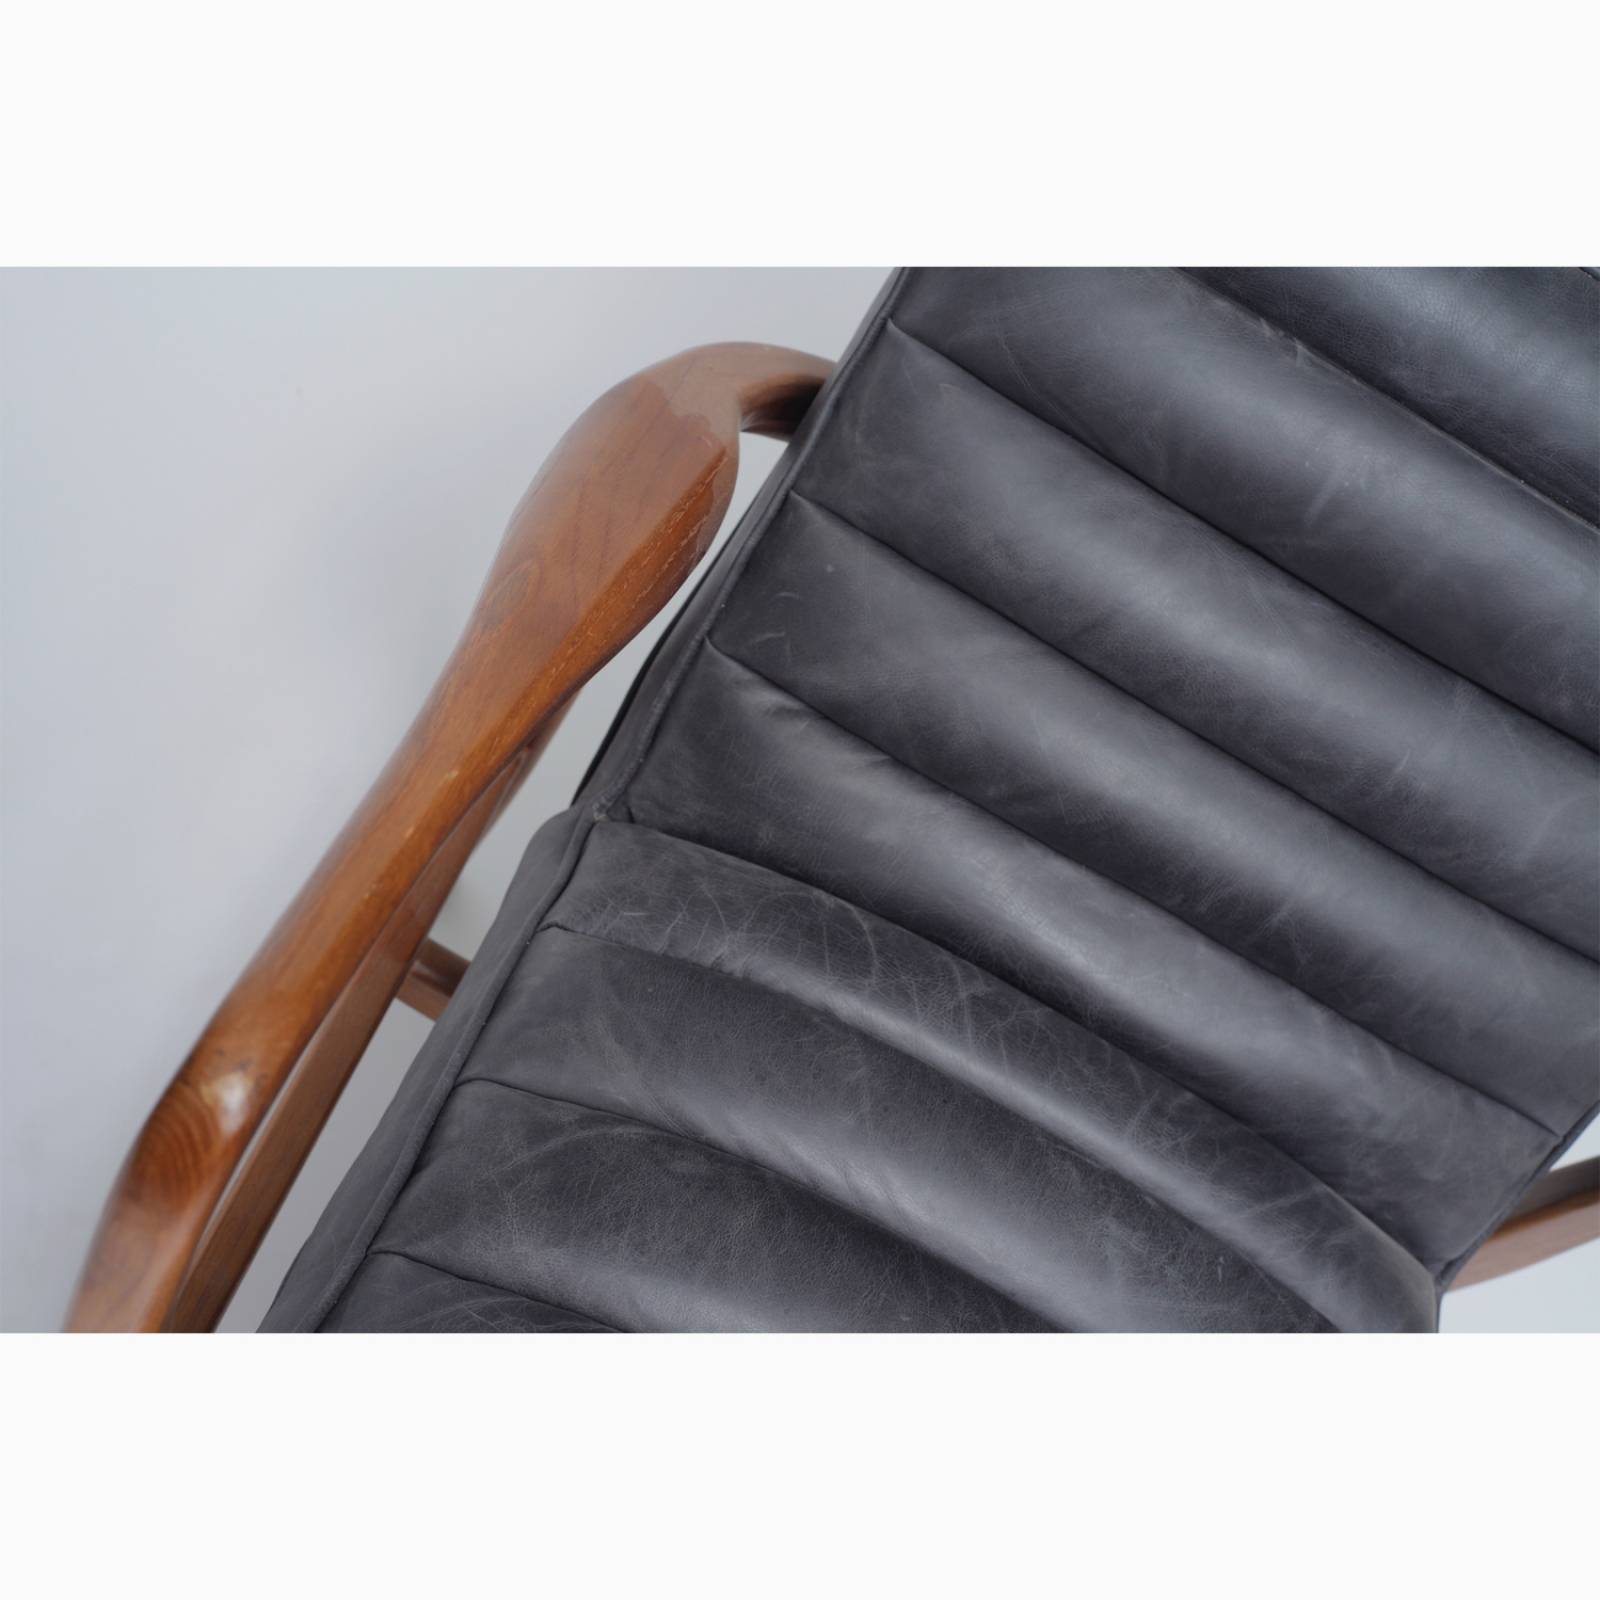 The Auto Oak Armchair in Distressed Ebony Leather thumbnails